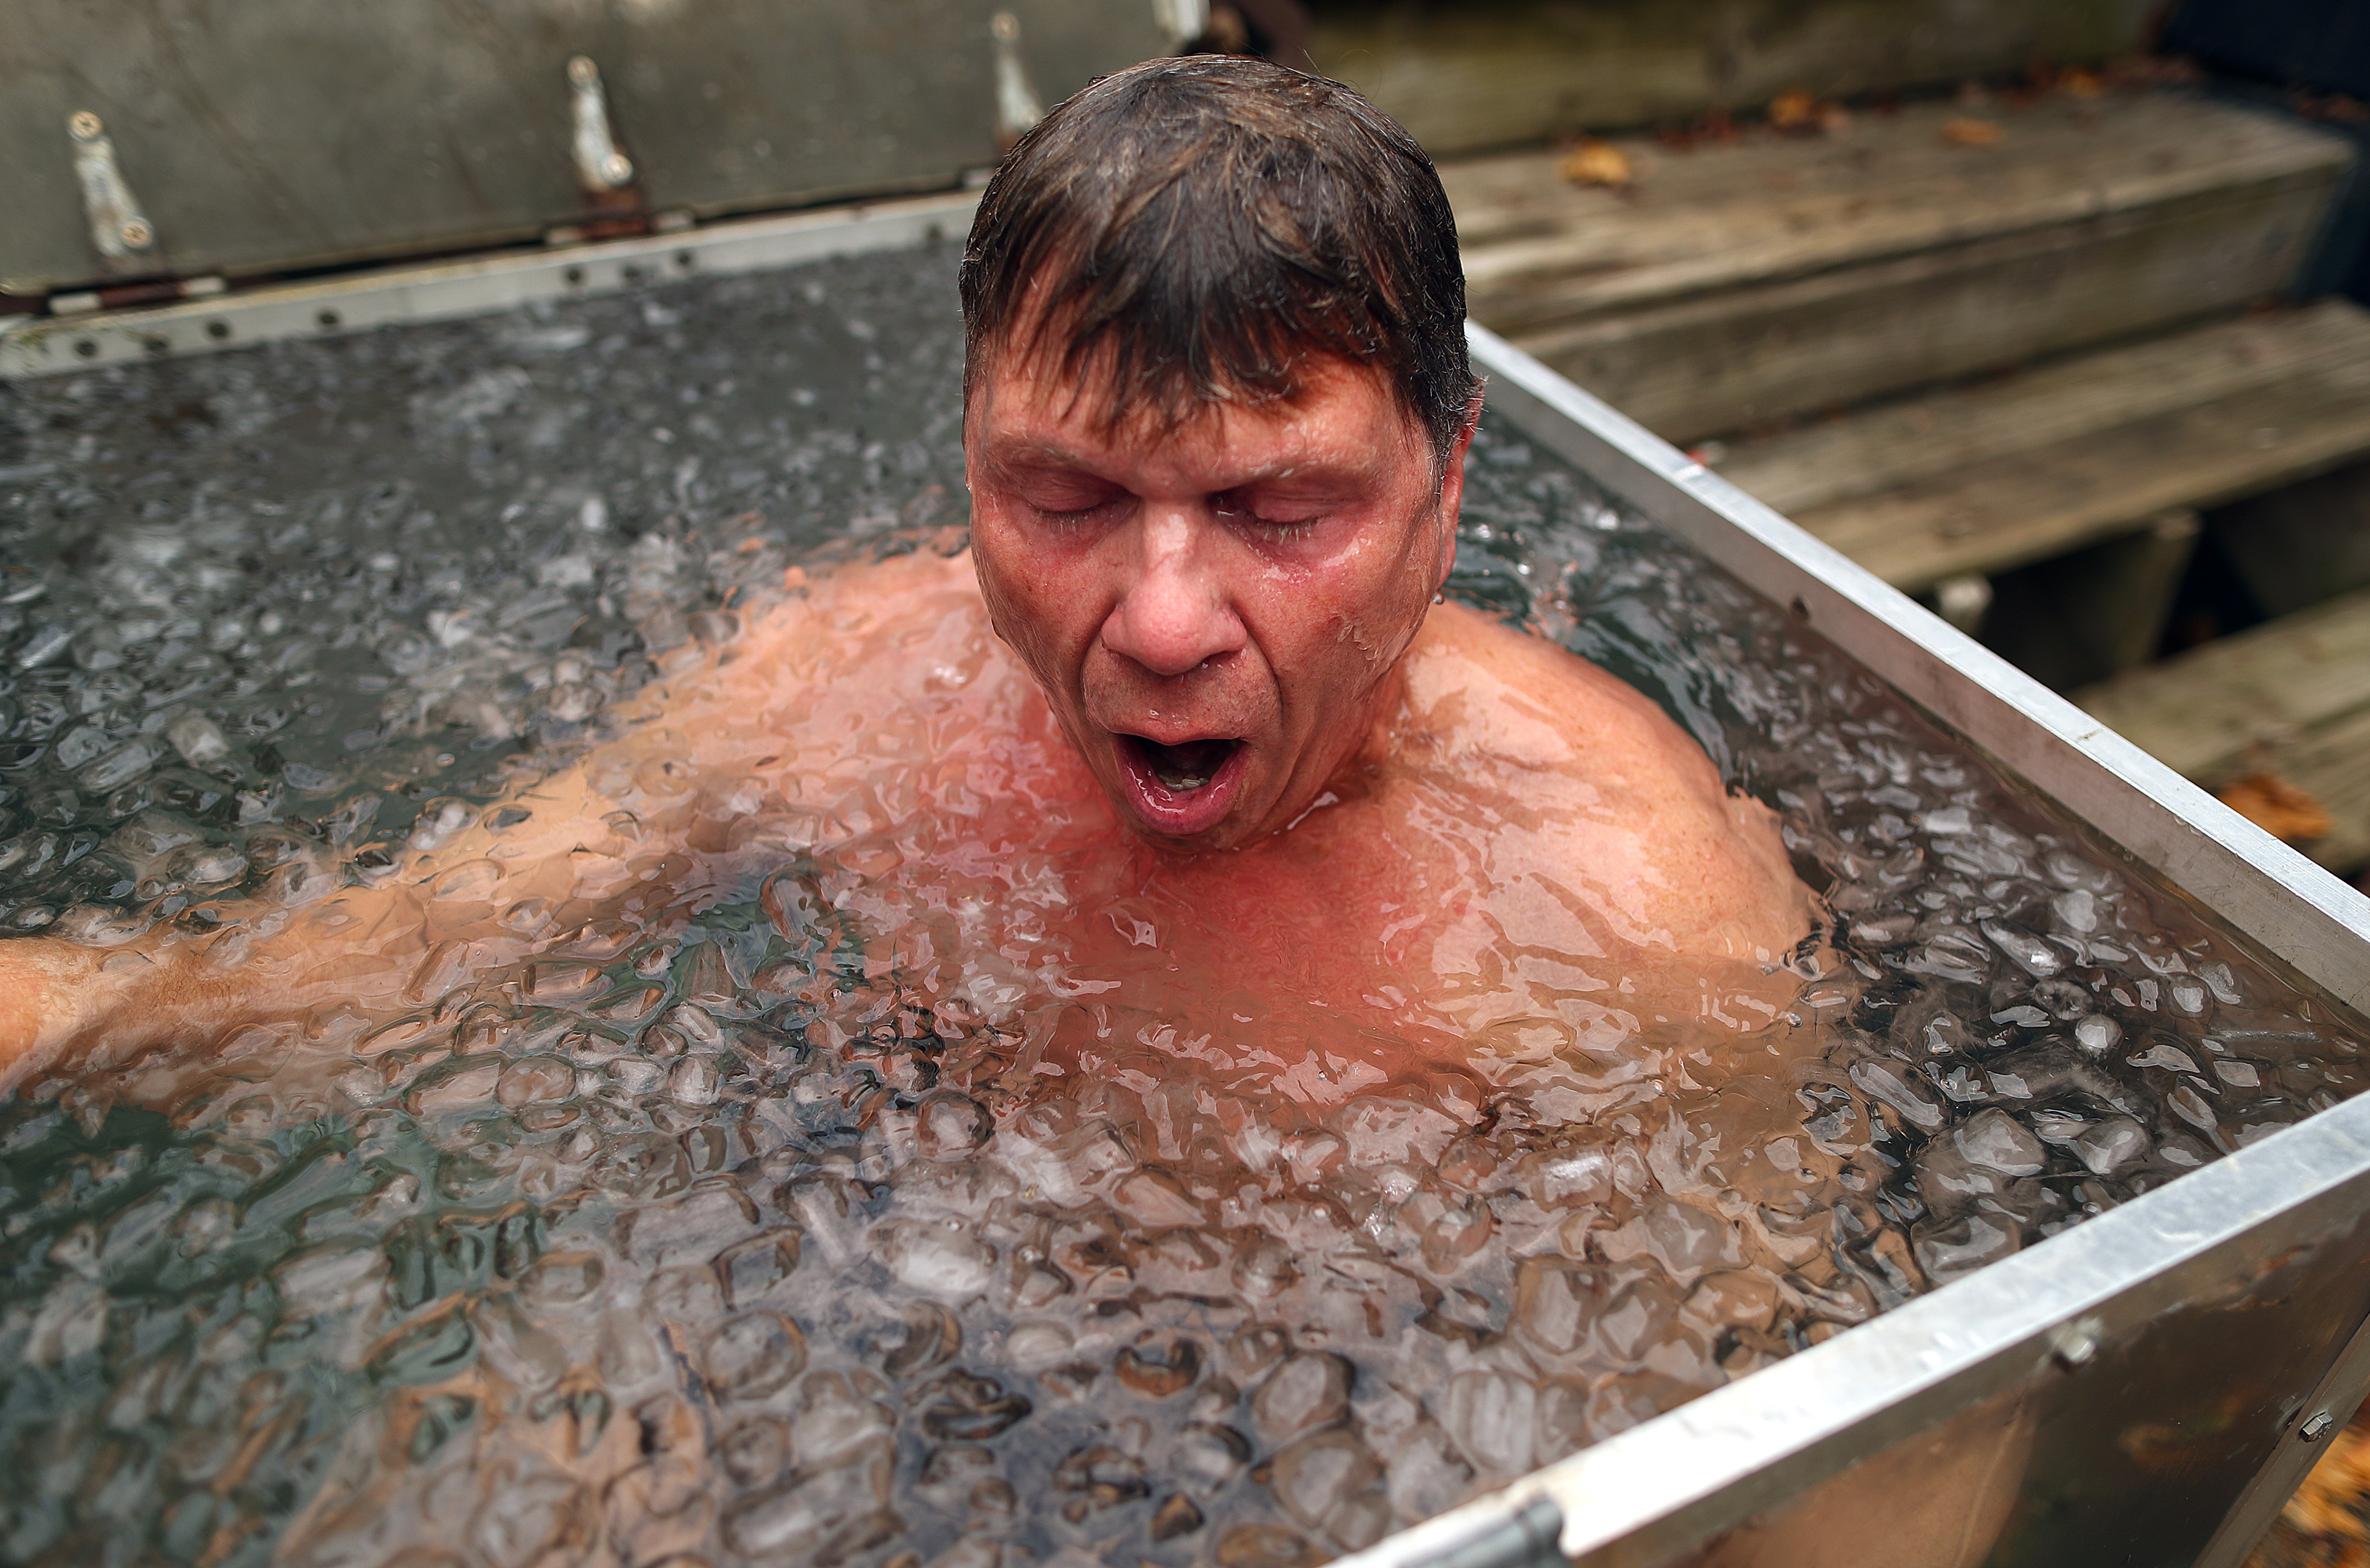 Bill Purnell, 60, takes a 20-minute ice bath in a backyard dunk tank filled with 10 bags of ice to make the water temperature a chill 36 degrees (year and location unknown) | Source: Getty Images